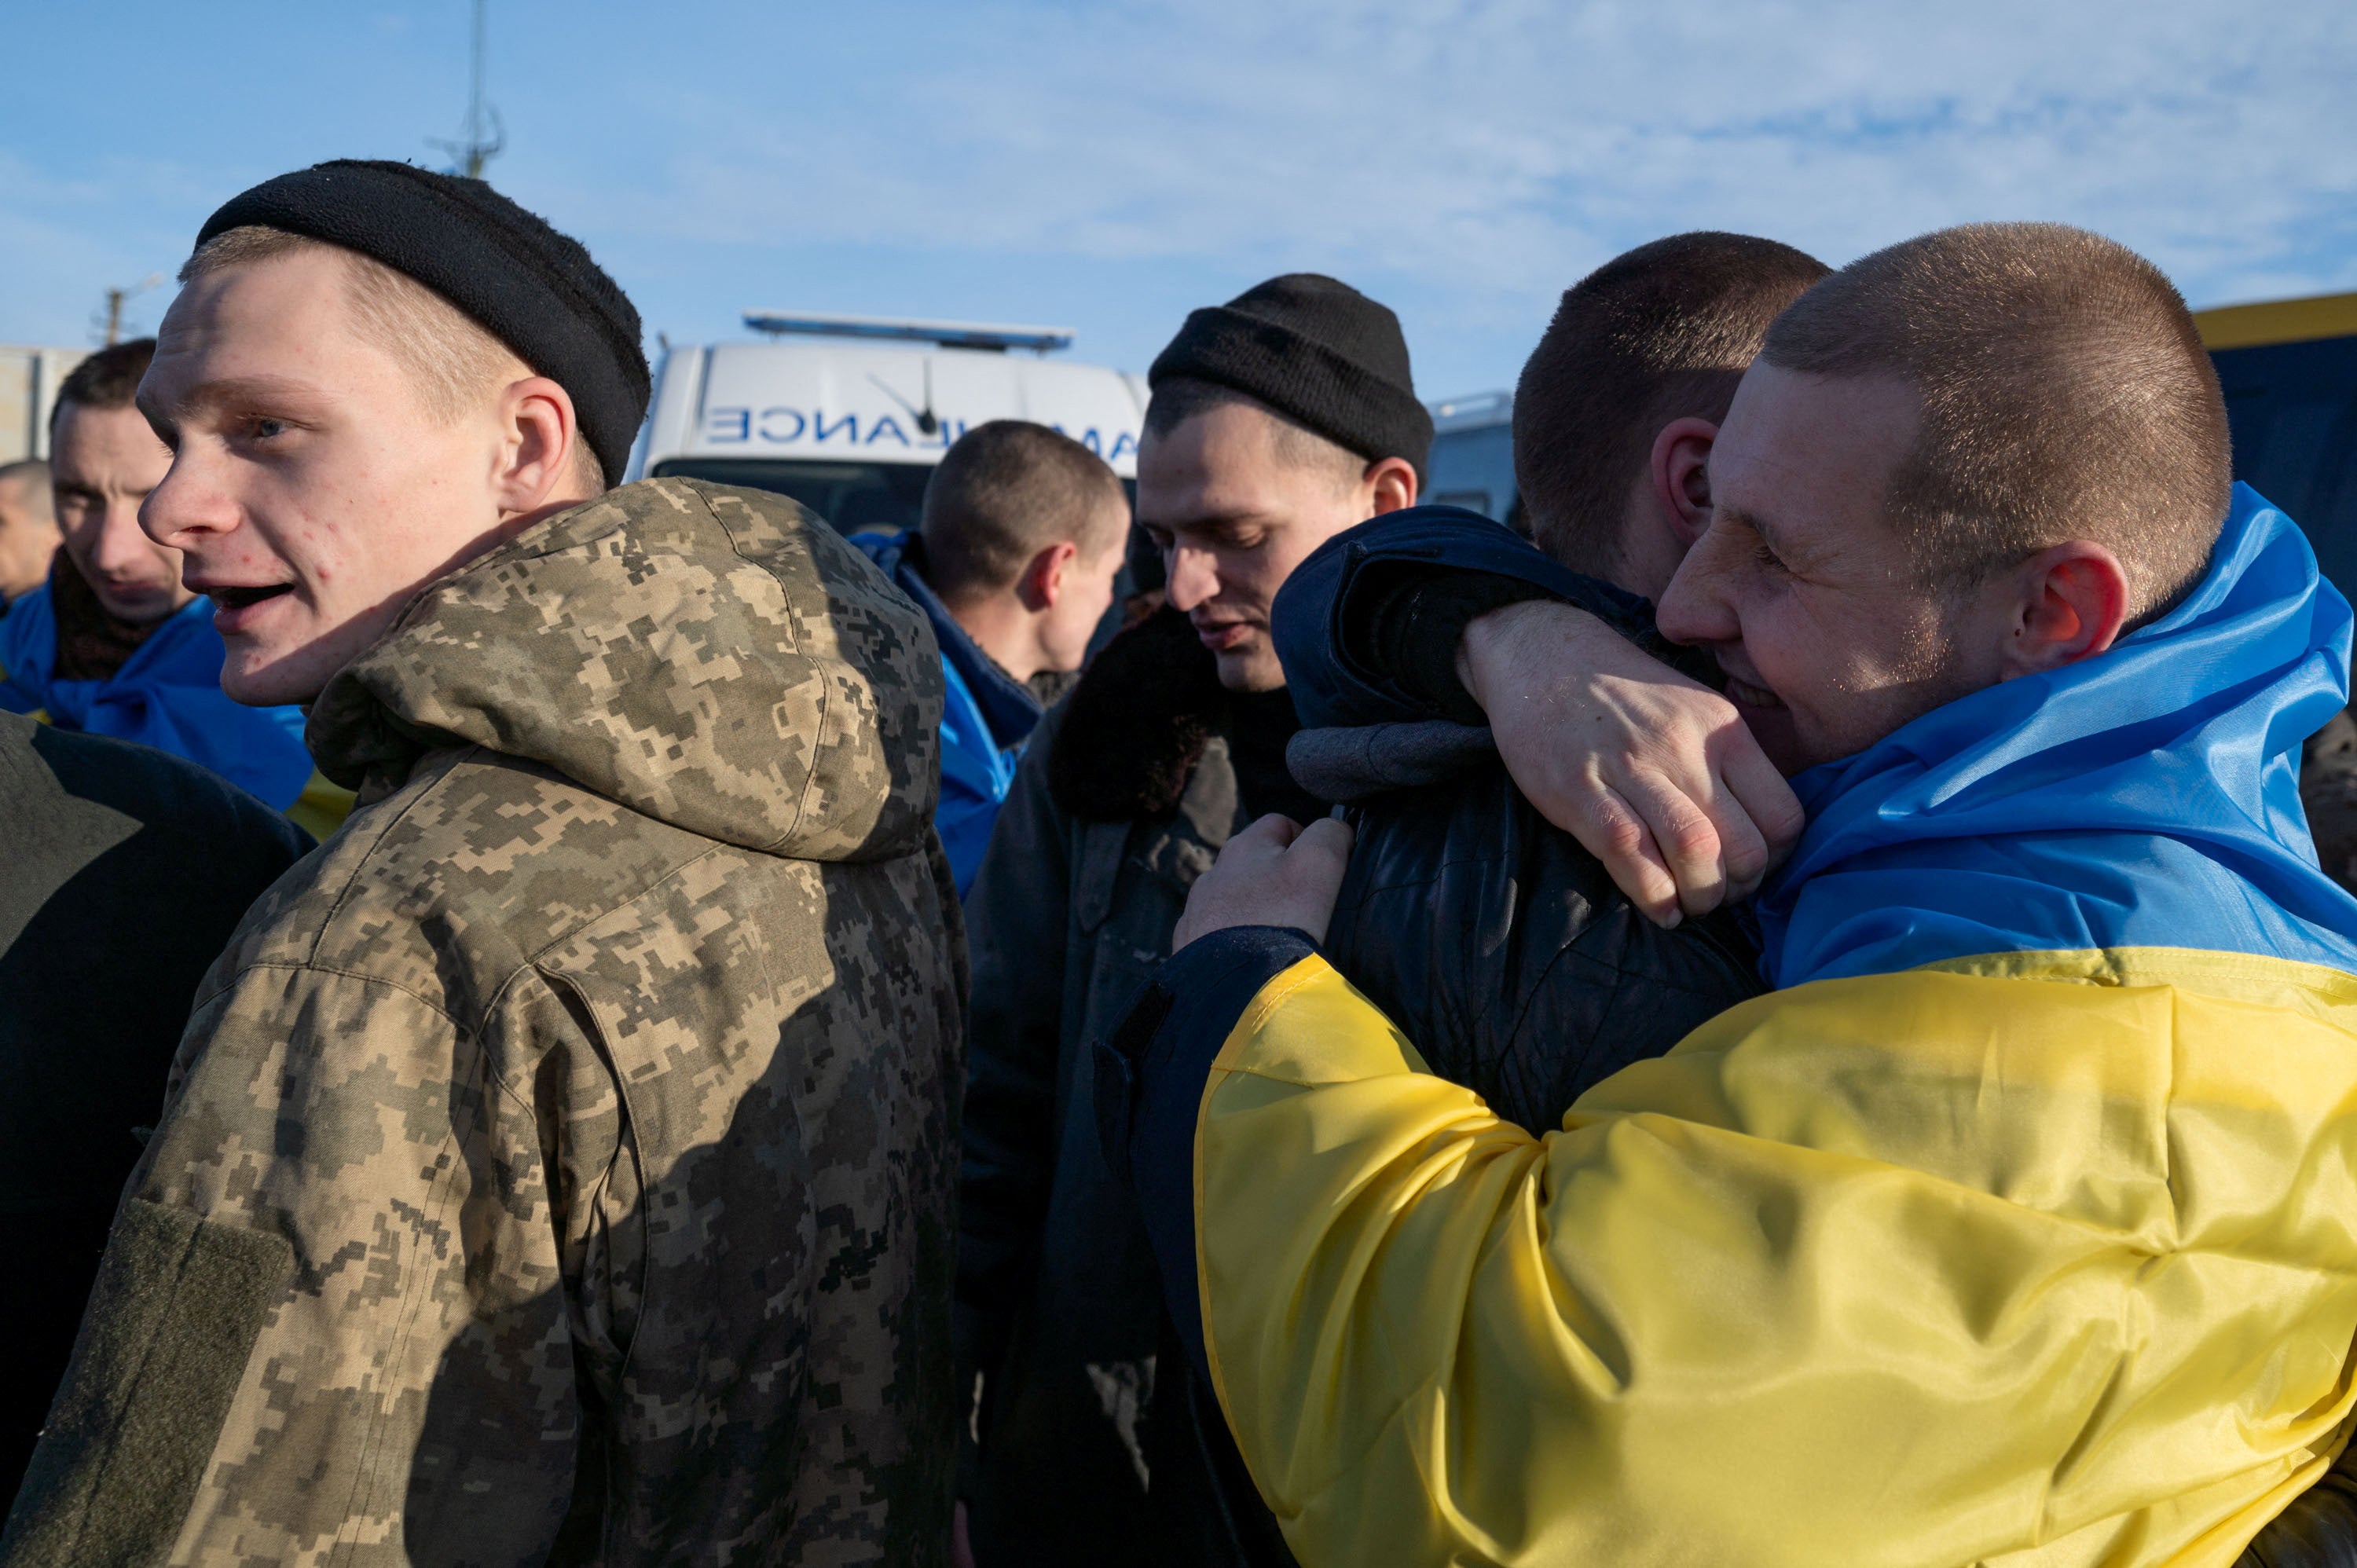 Ukrainian prisoners of war (POWs) react after a swap, amid Russia’s attack on Ukraine, at an unknown location in Ukraine